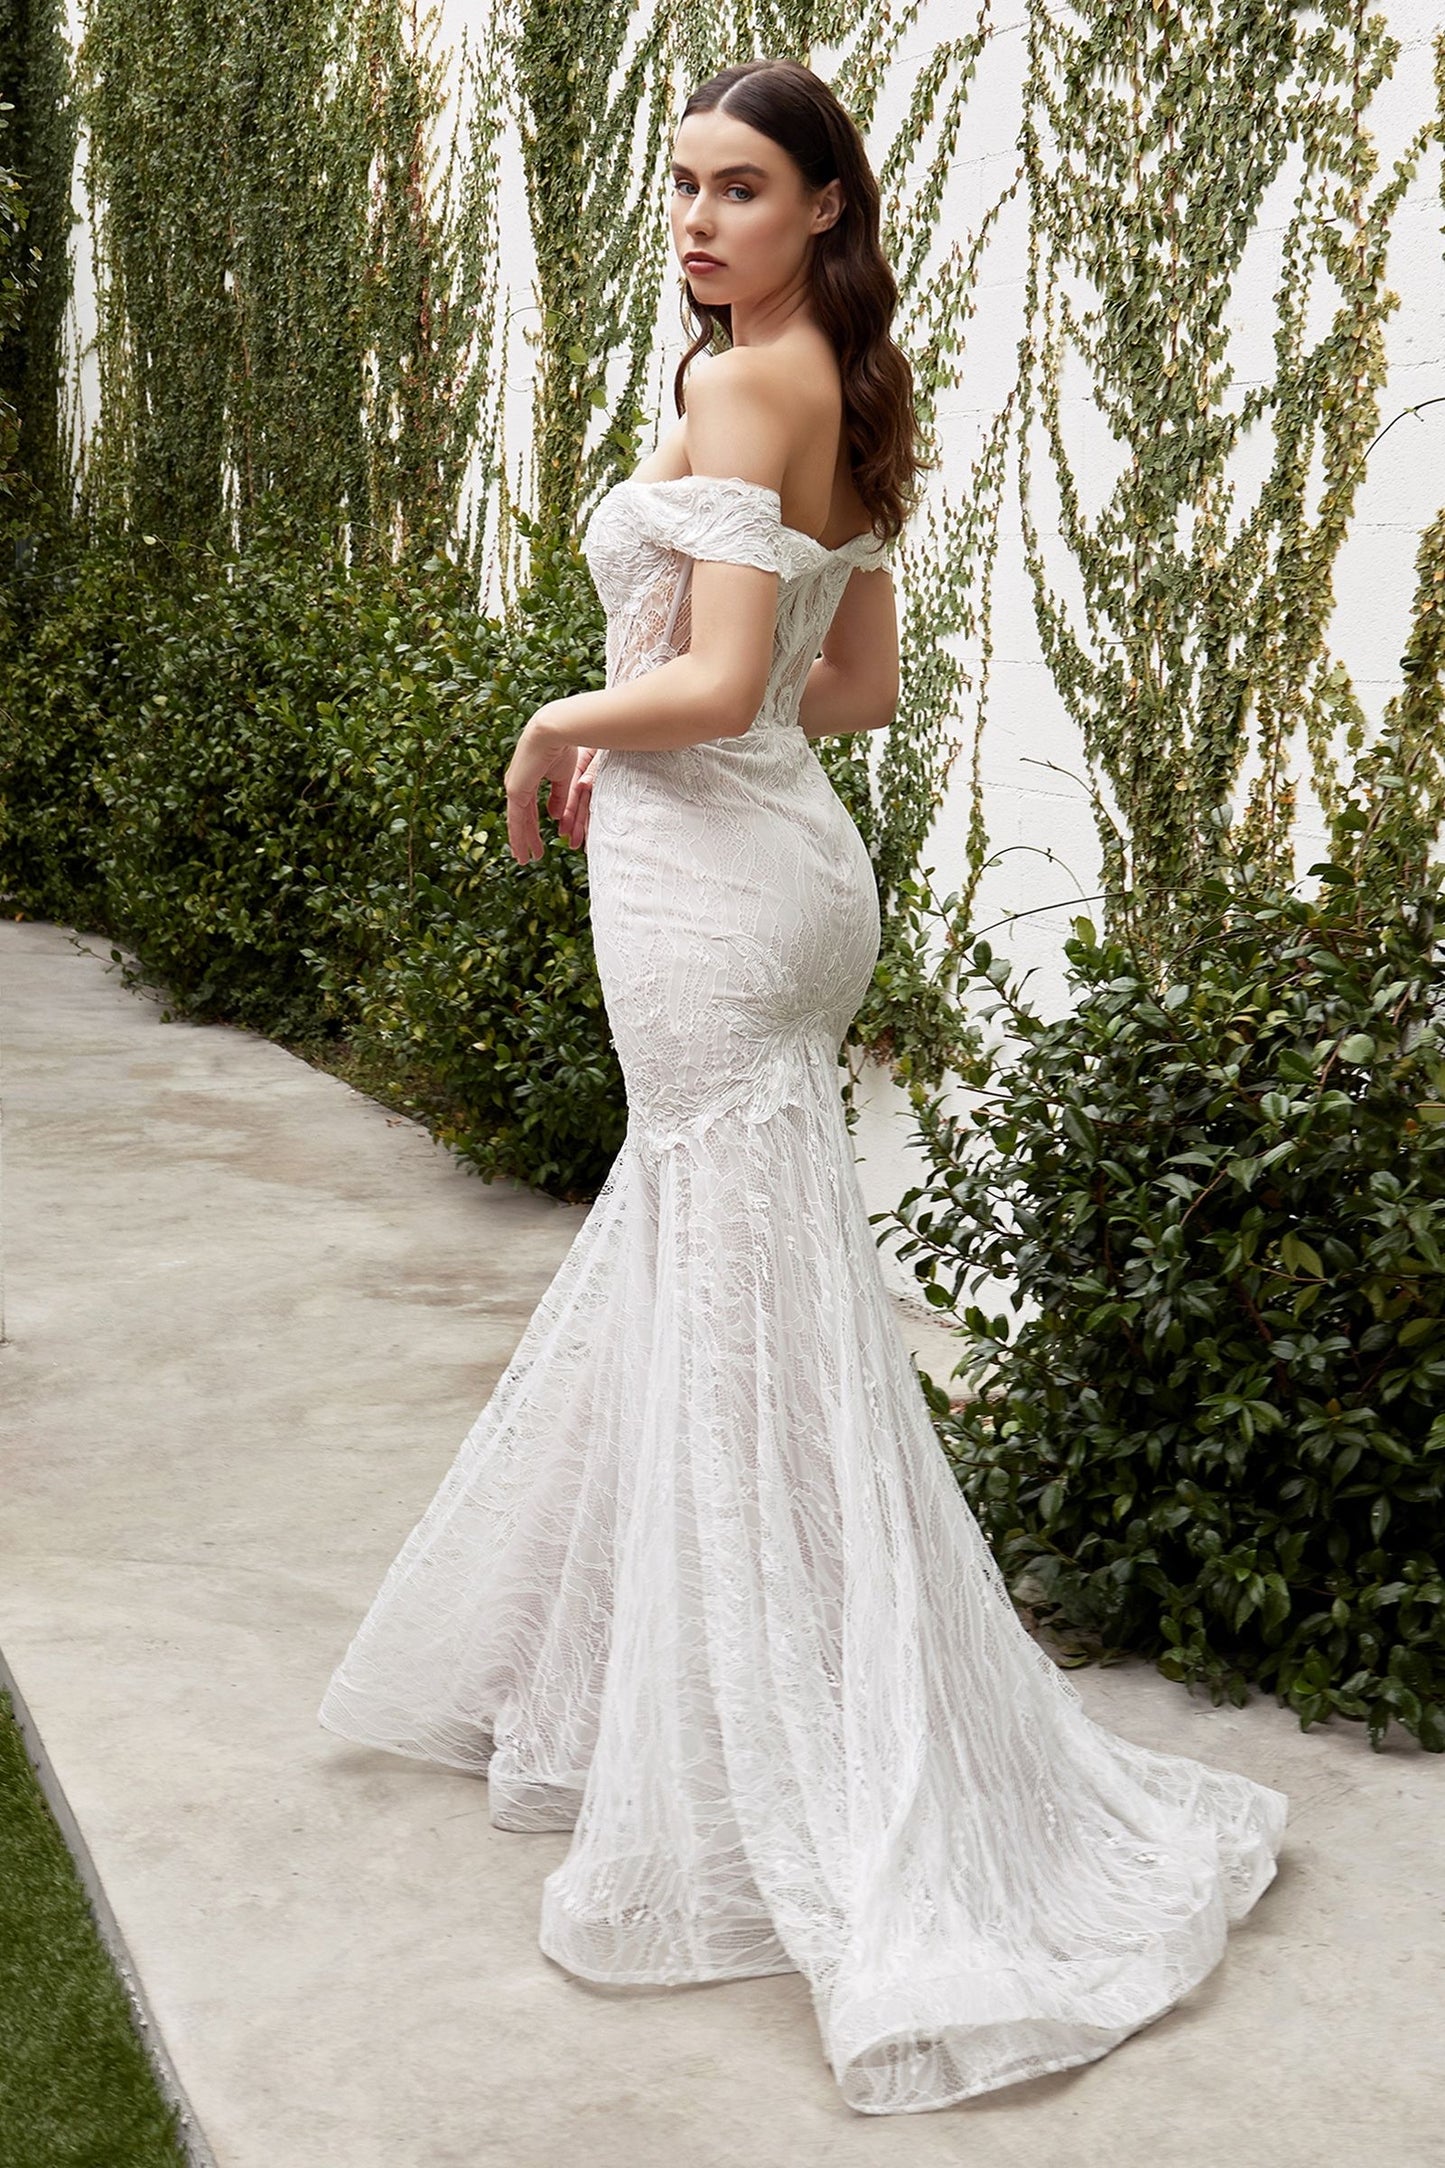 a classic a-line wedding dress in off white featuring a delicate lace overlay and a subtle train